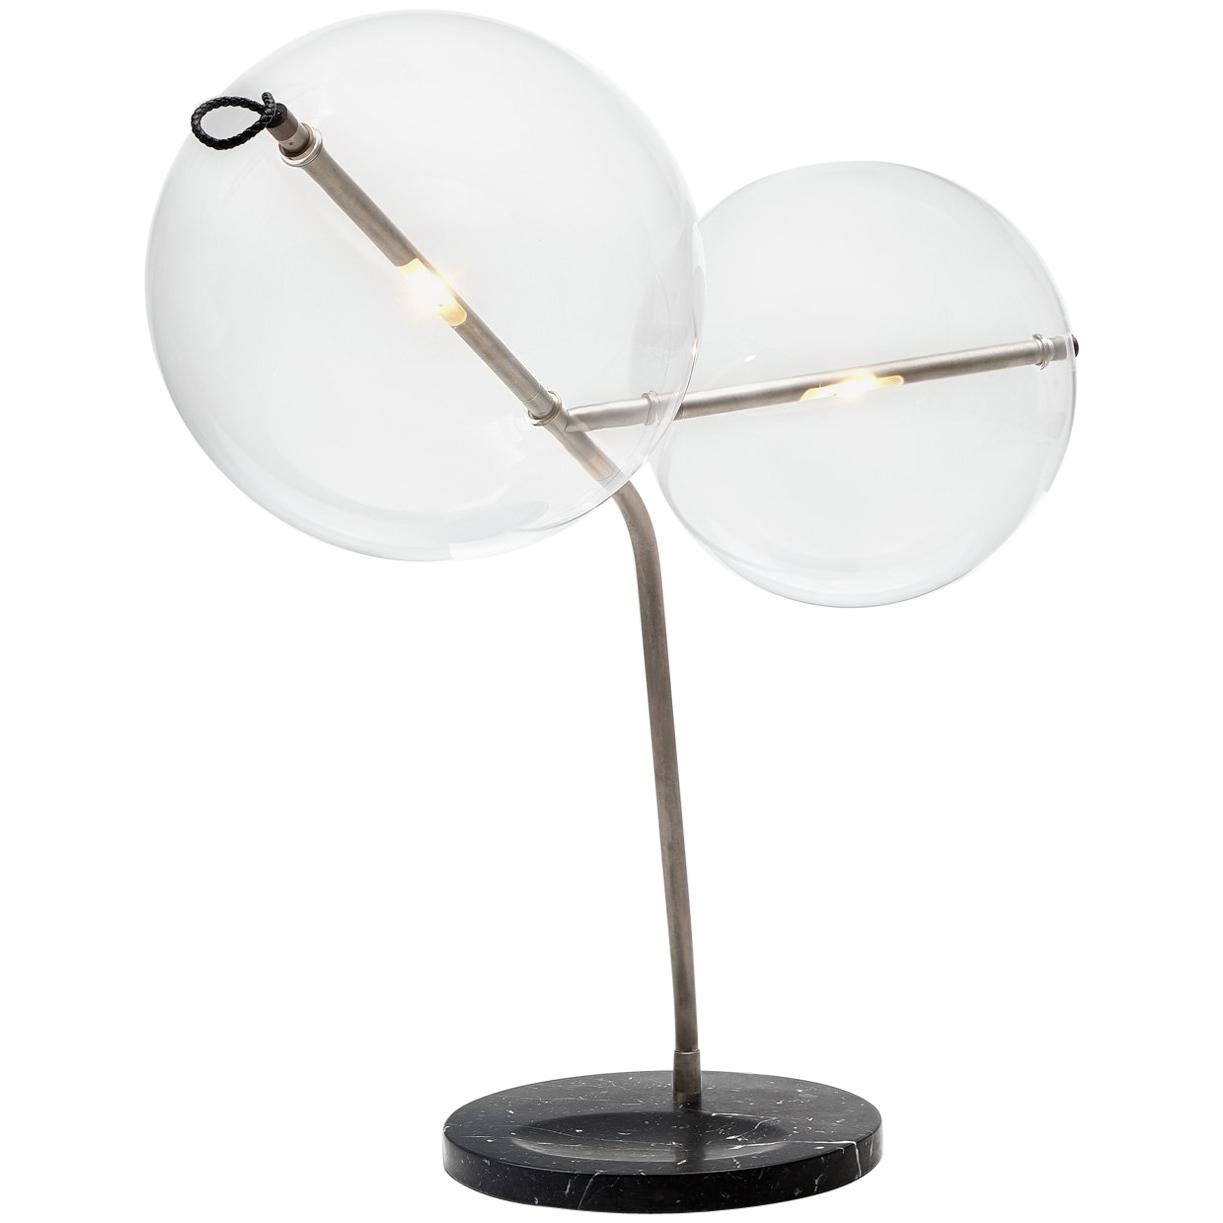 T-Bubble Tarnished Silver Desk / Table Lamp, Brass, Marble, LED Dimmable Sensor